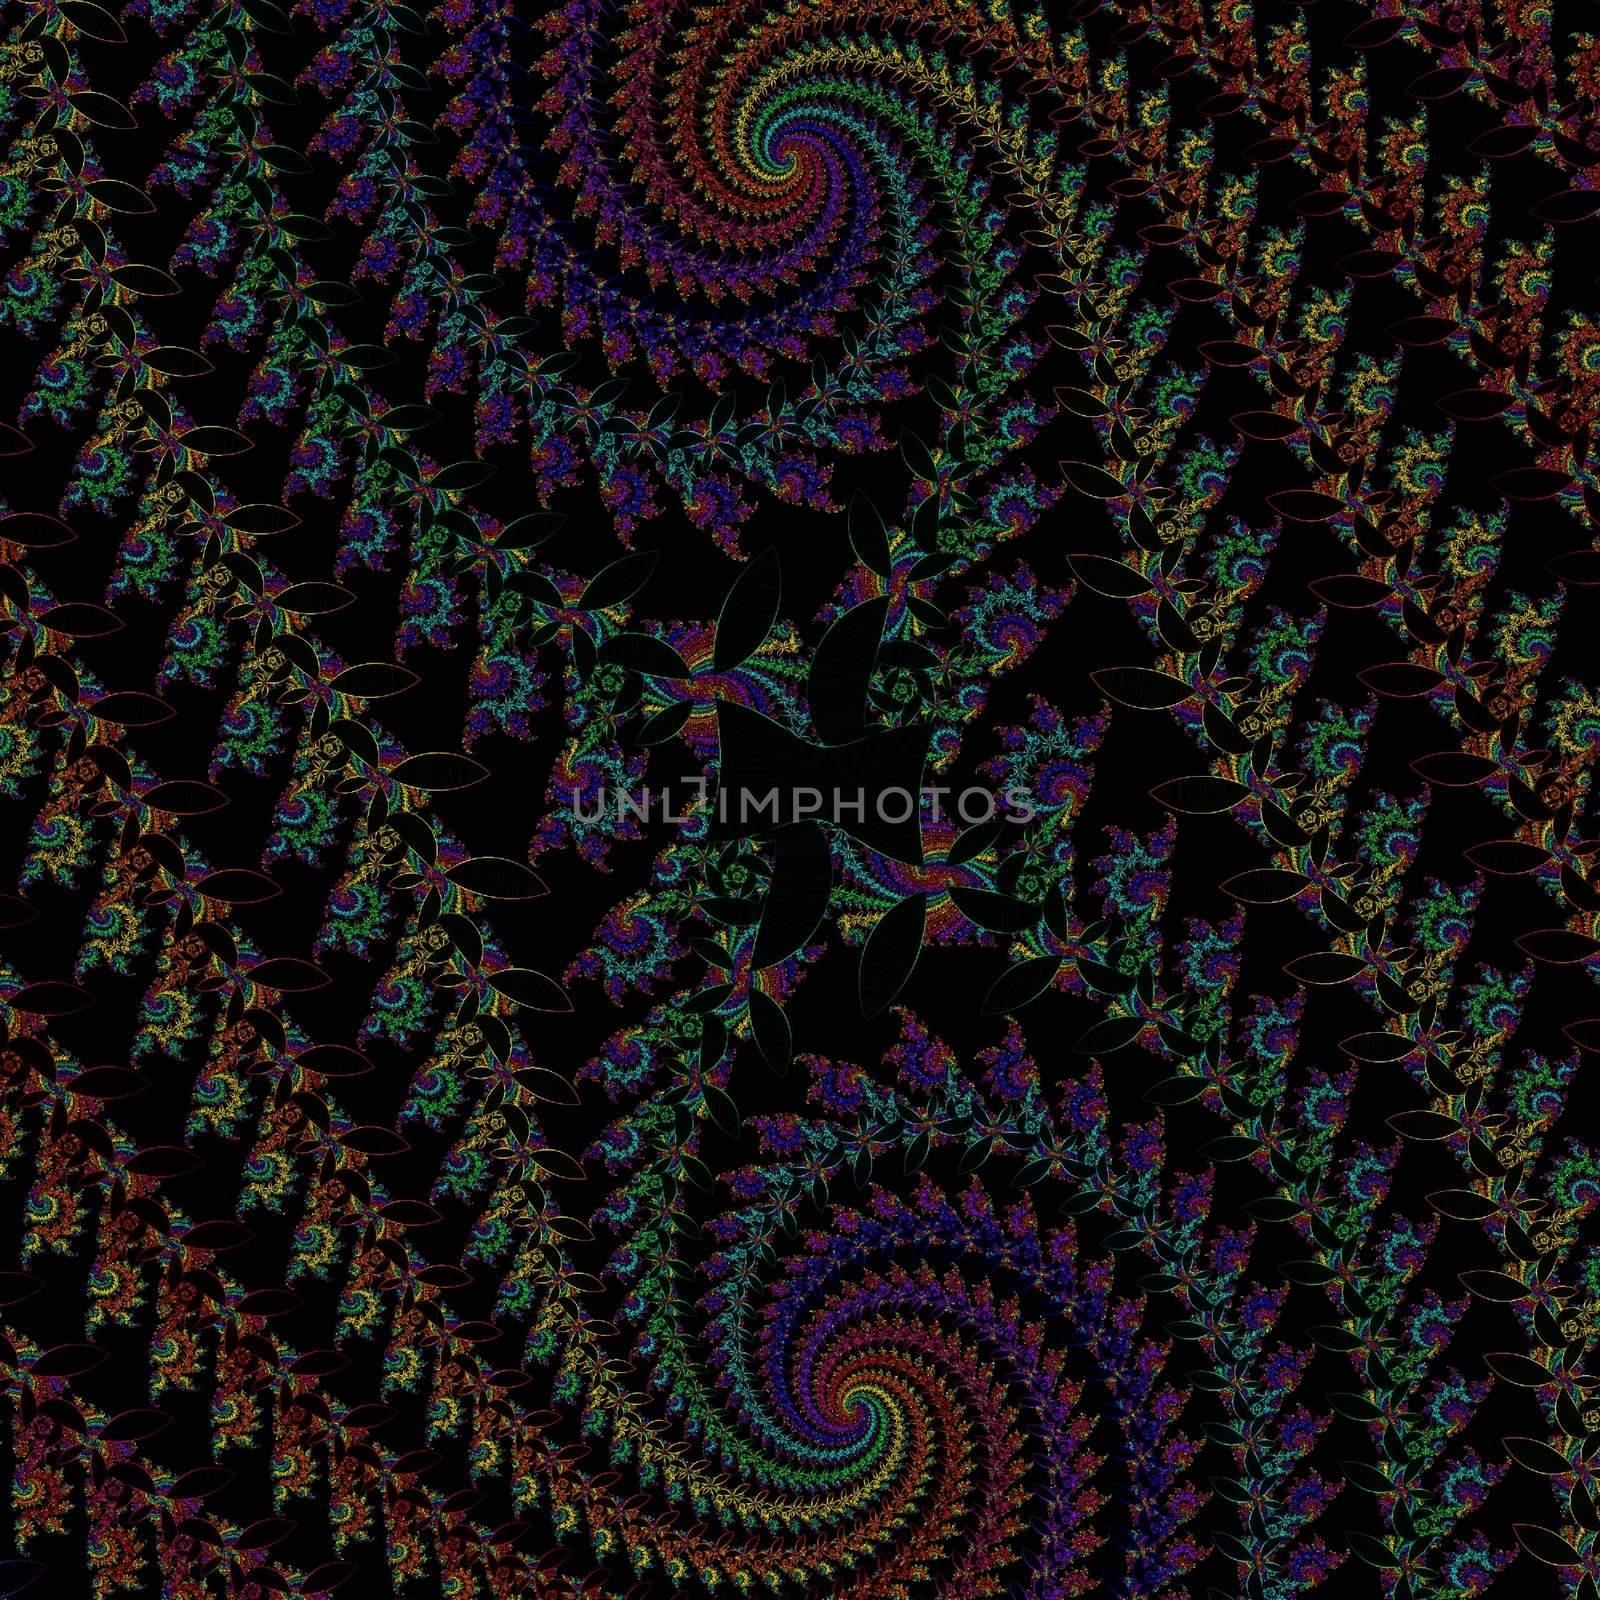 multi colored double spiral over black background formed by many flowers